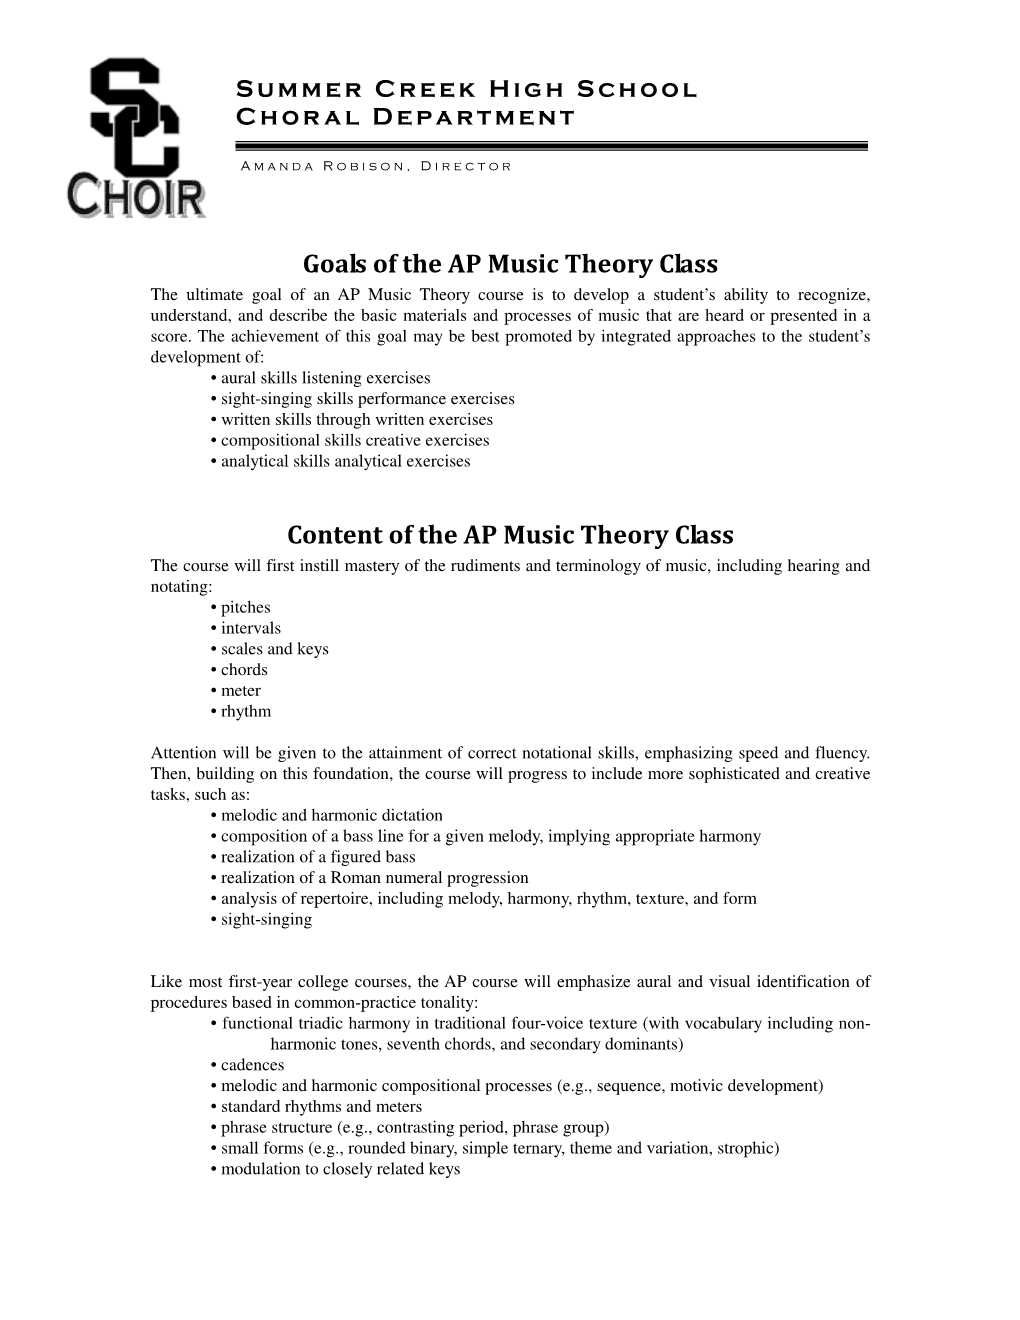 Goals of the AP Music Theory Class Content of the AP